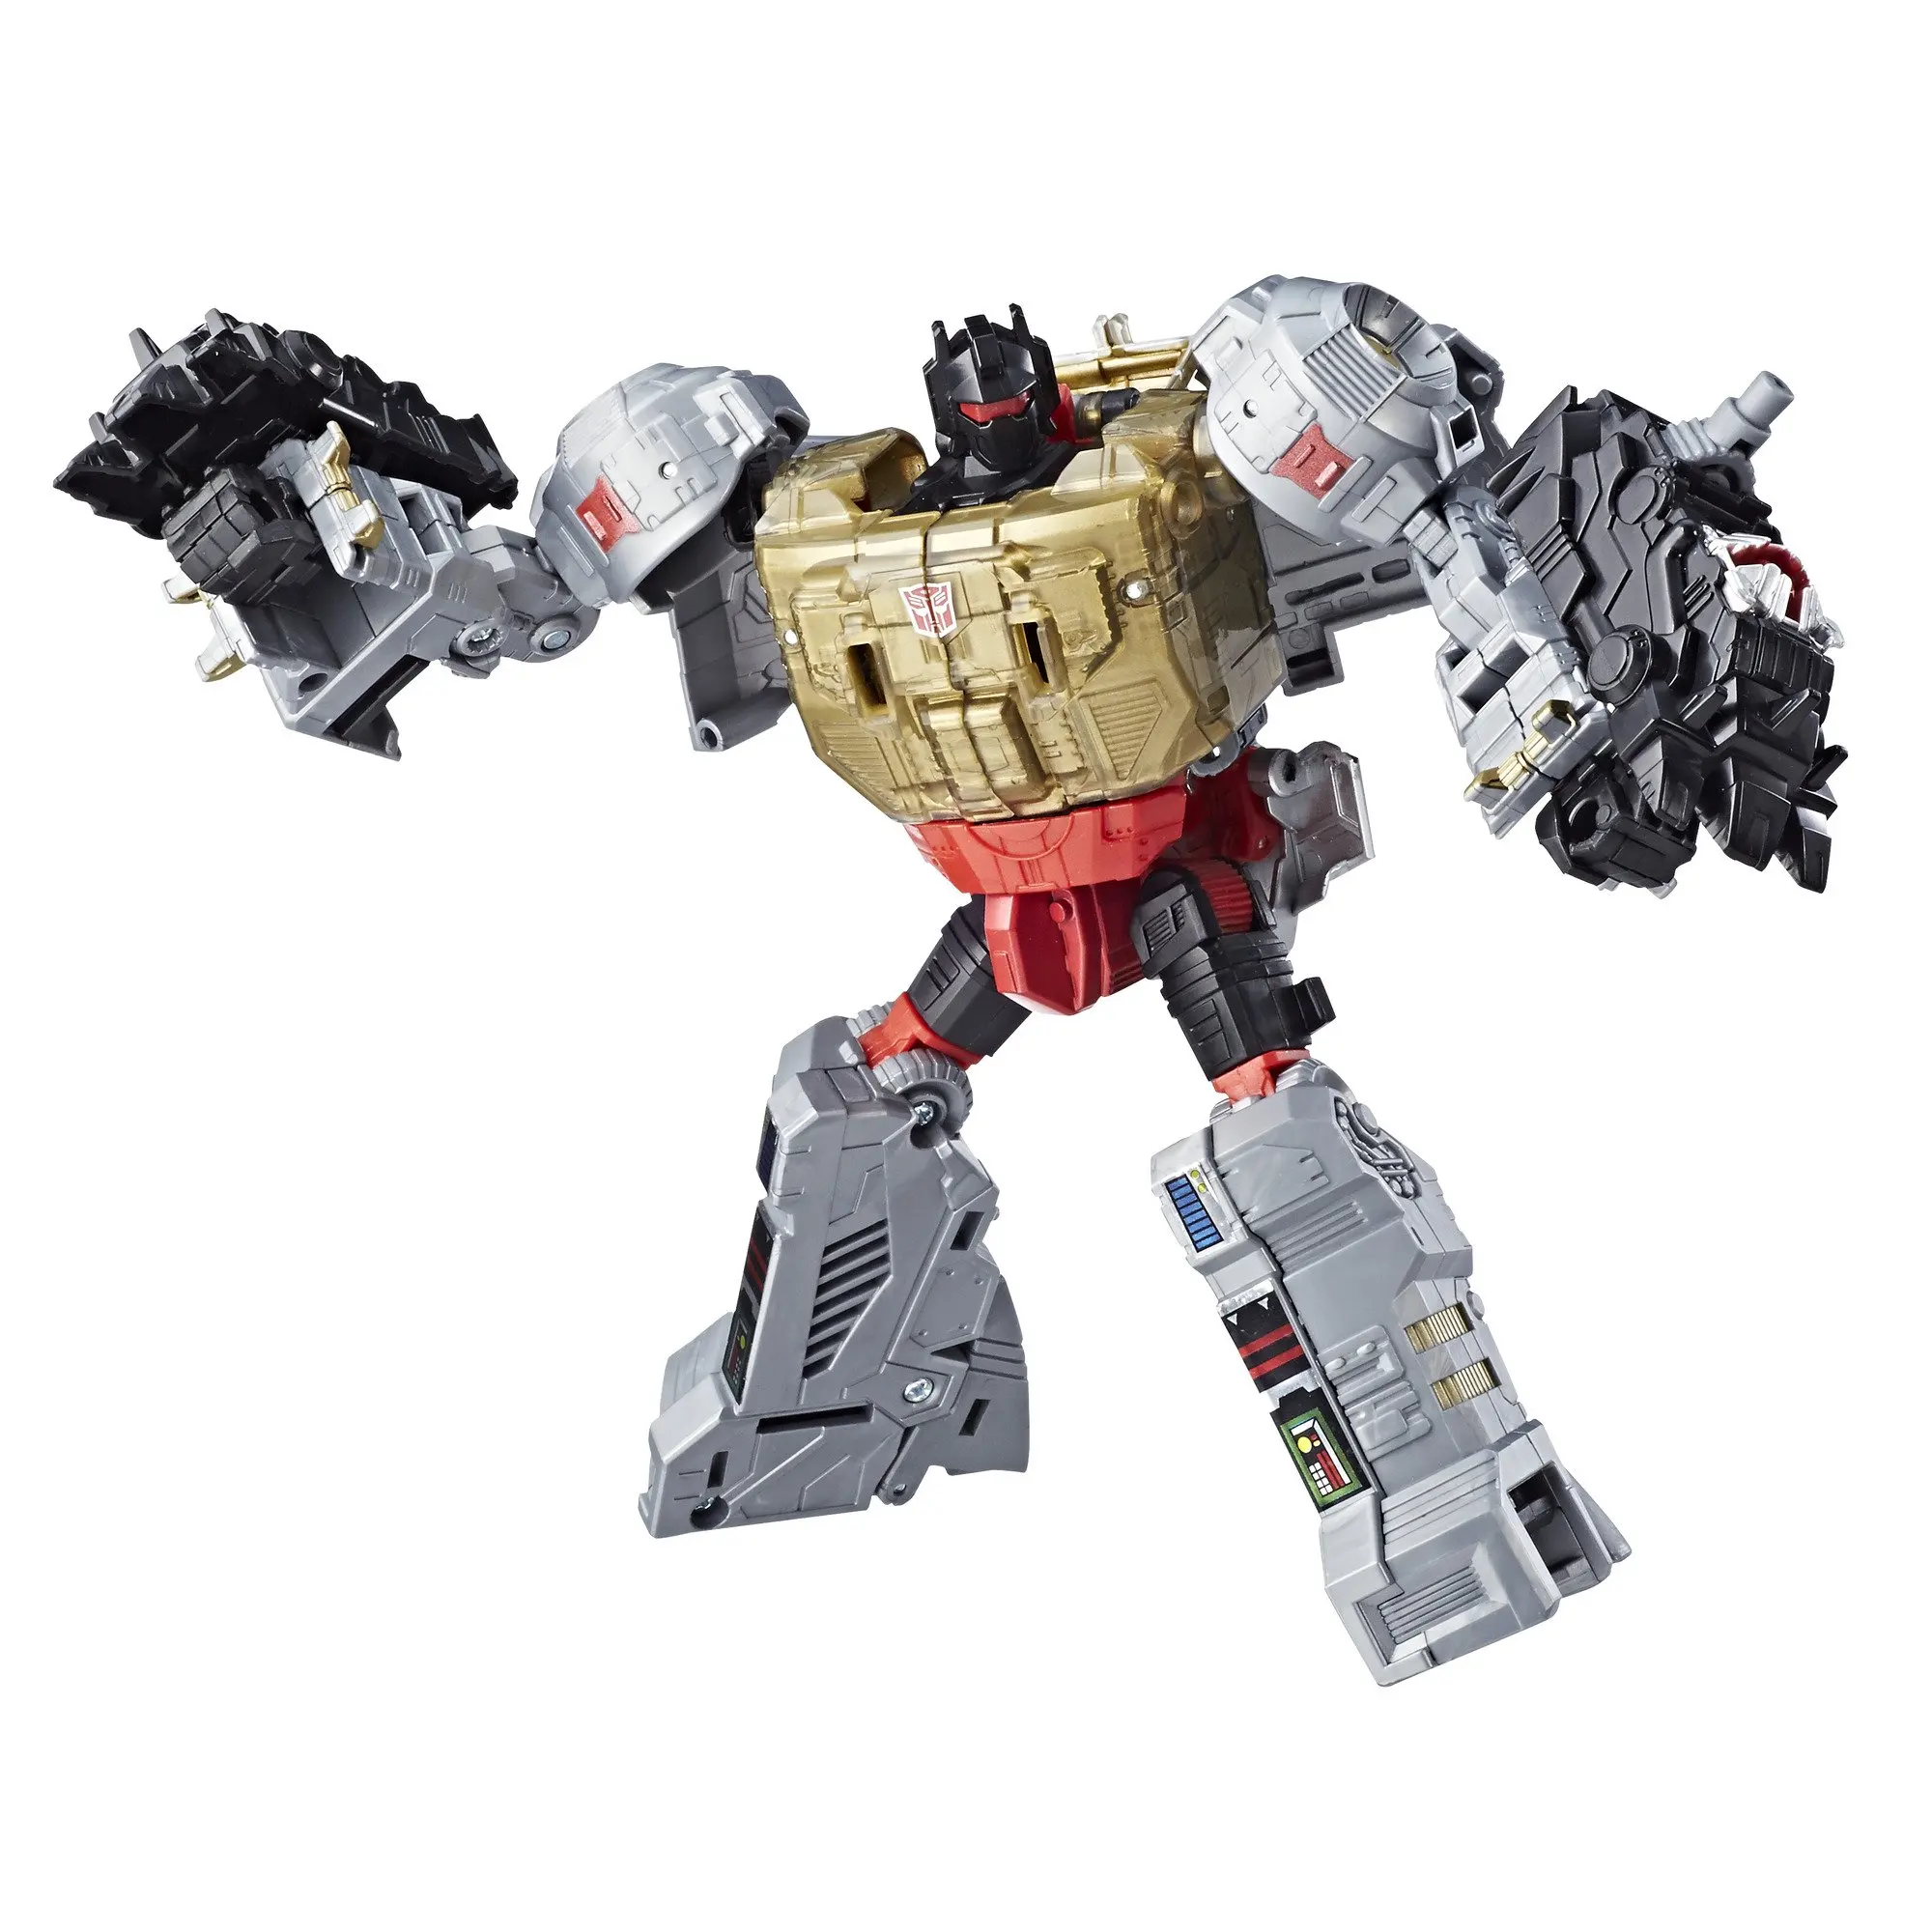 

Hasbro Transformers Generations Power of the Primes Voyager Class Grimlock Gift Toys E1136